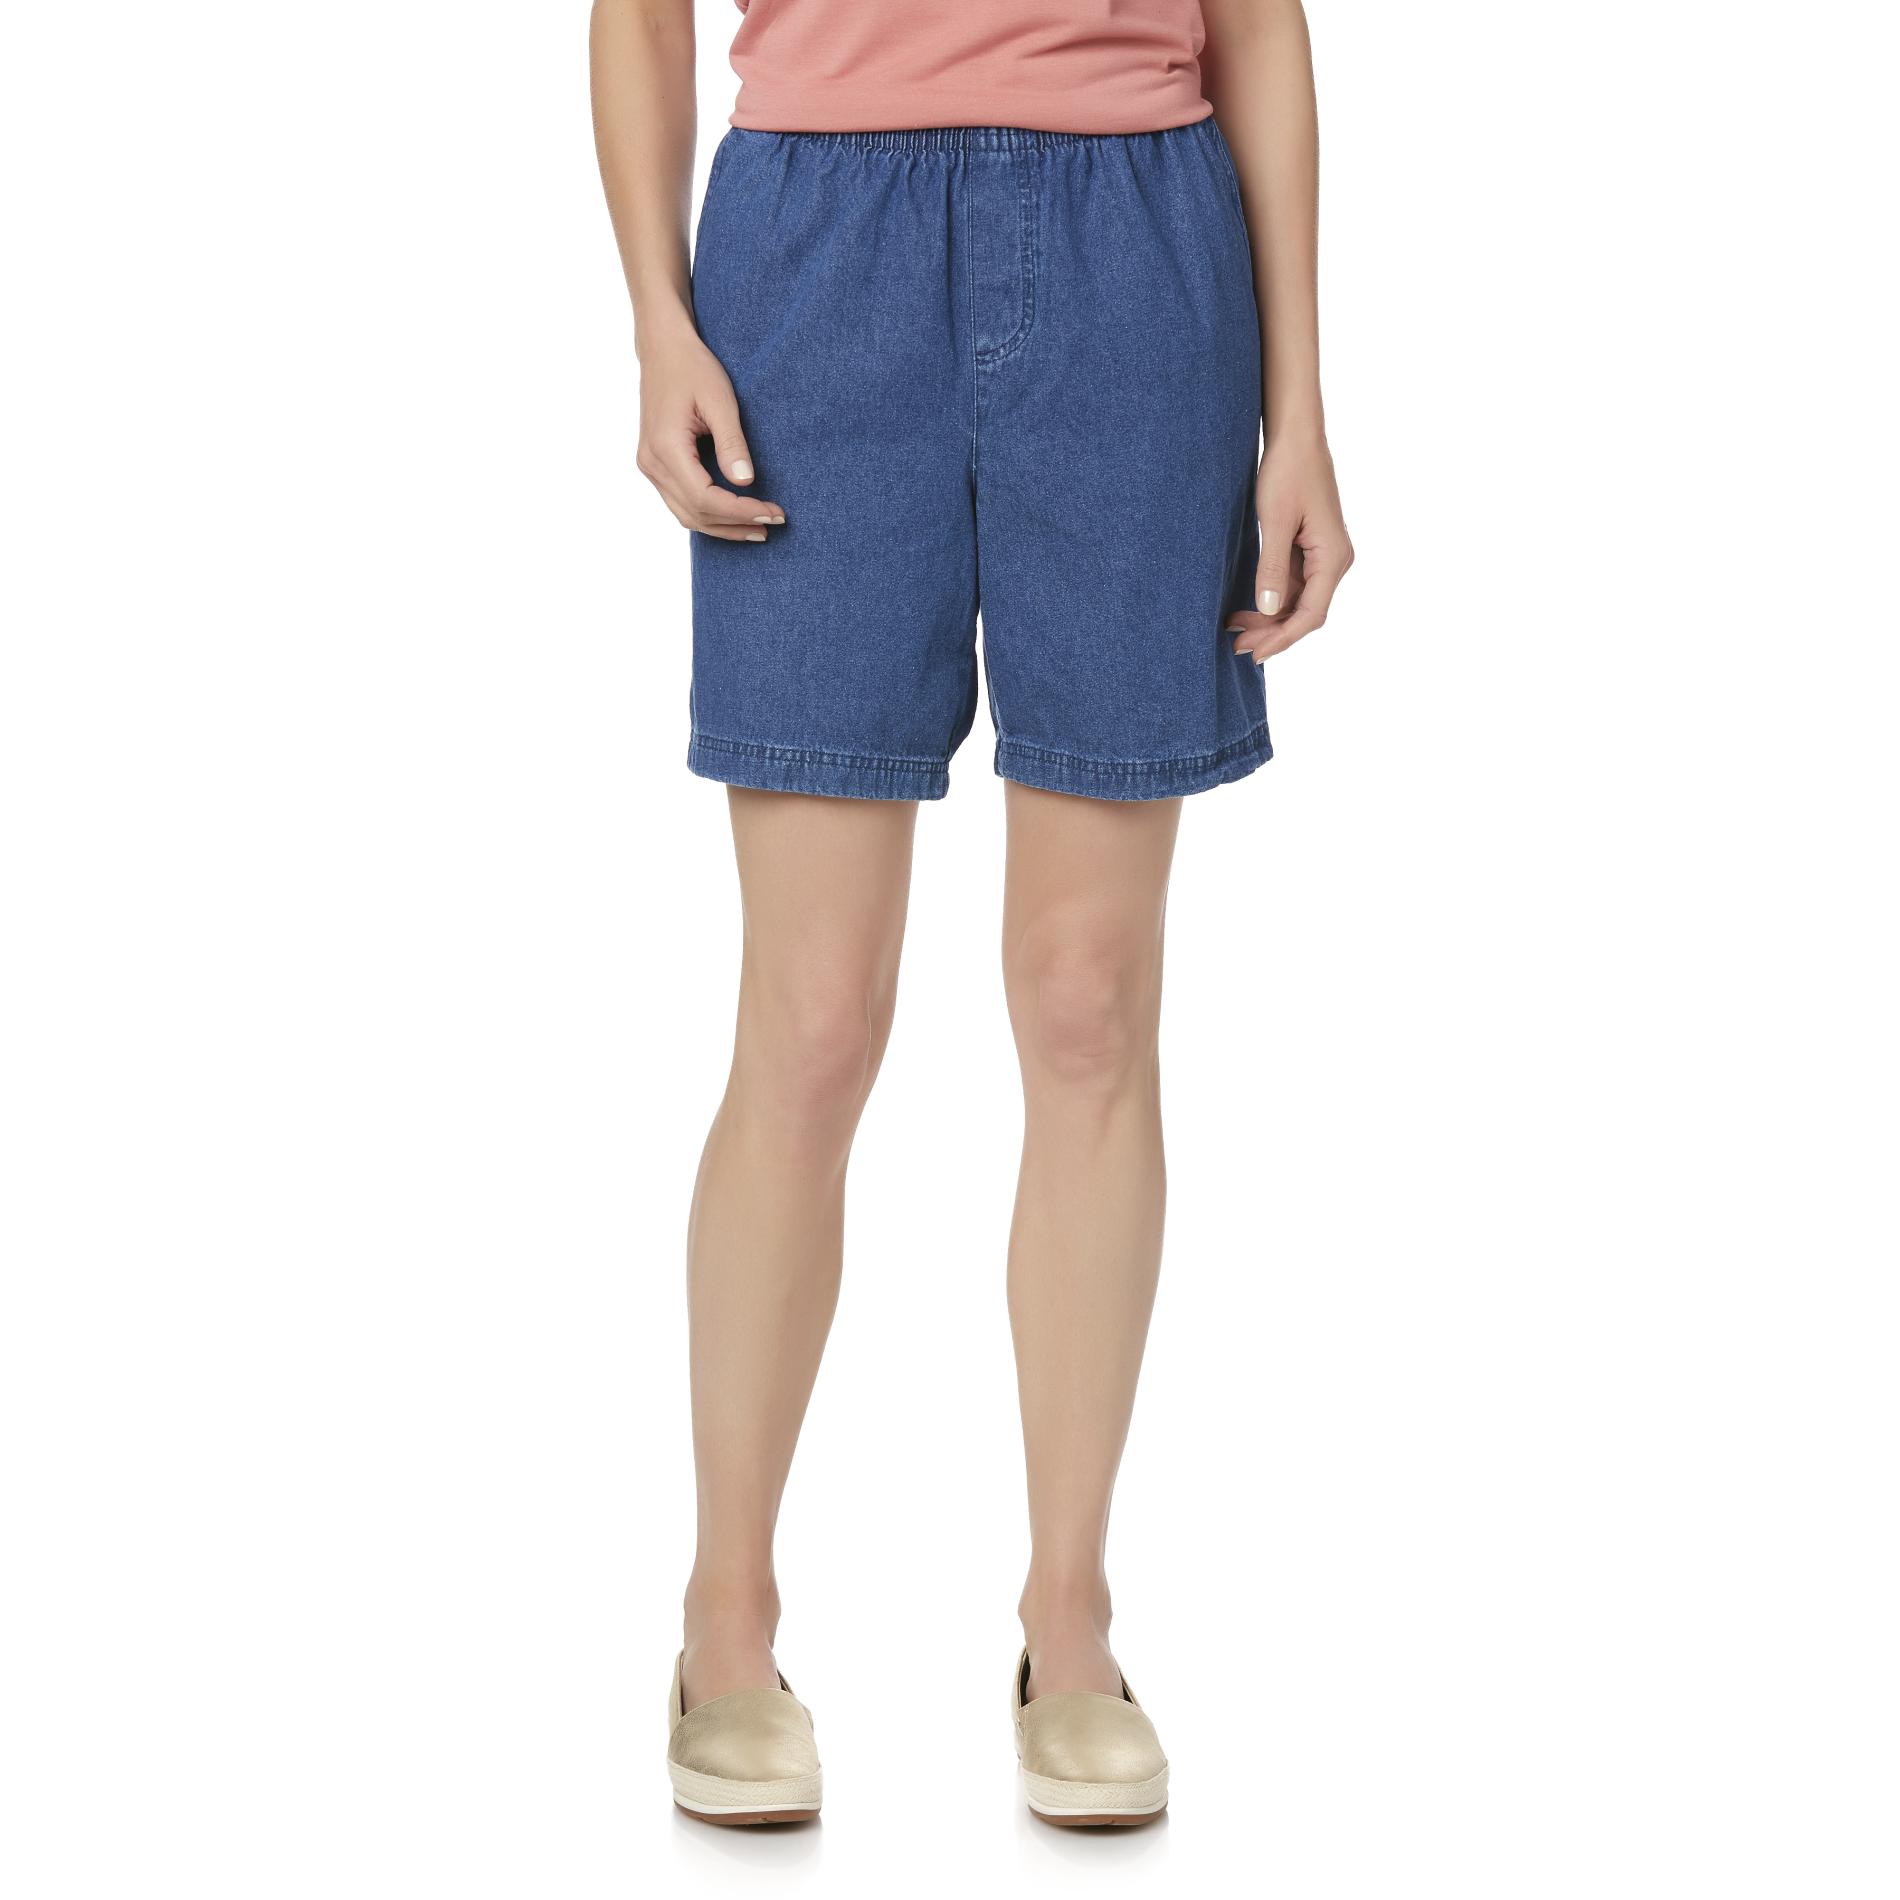 womens jean shorts with elastic waistband